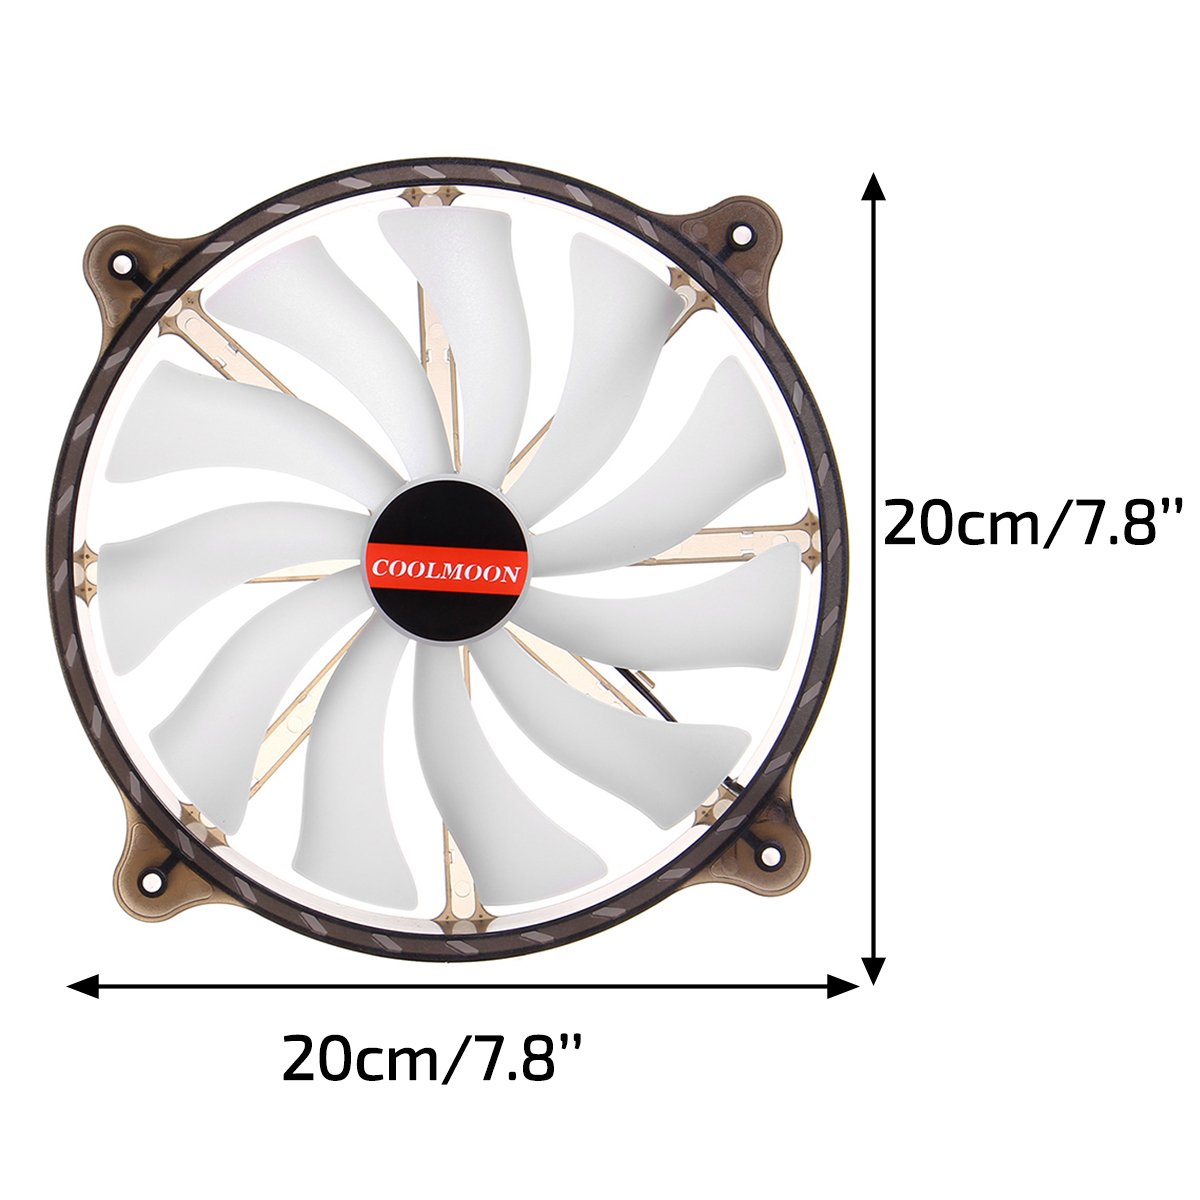 Cool-Moon-CR200mm-Chassis-Computer-Case-Fan-RGB-Mute-Streamer-LED-Computer-Host-20cm-Cooling-Fan-1634887-10